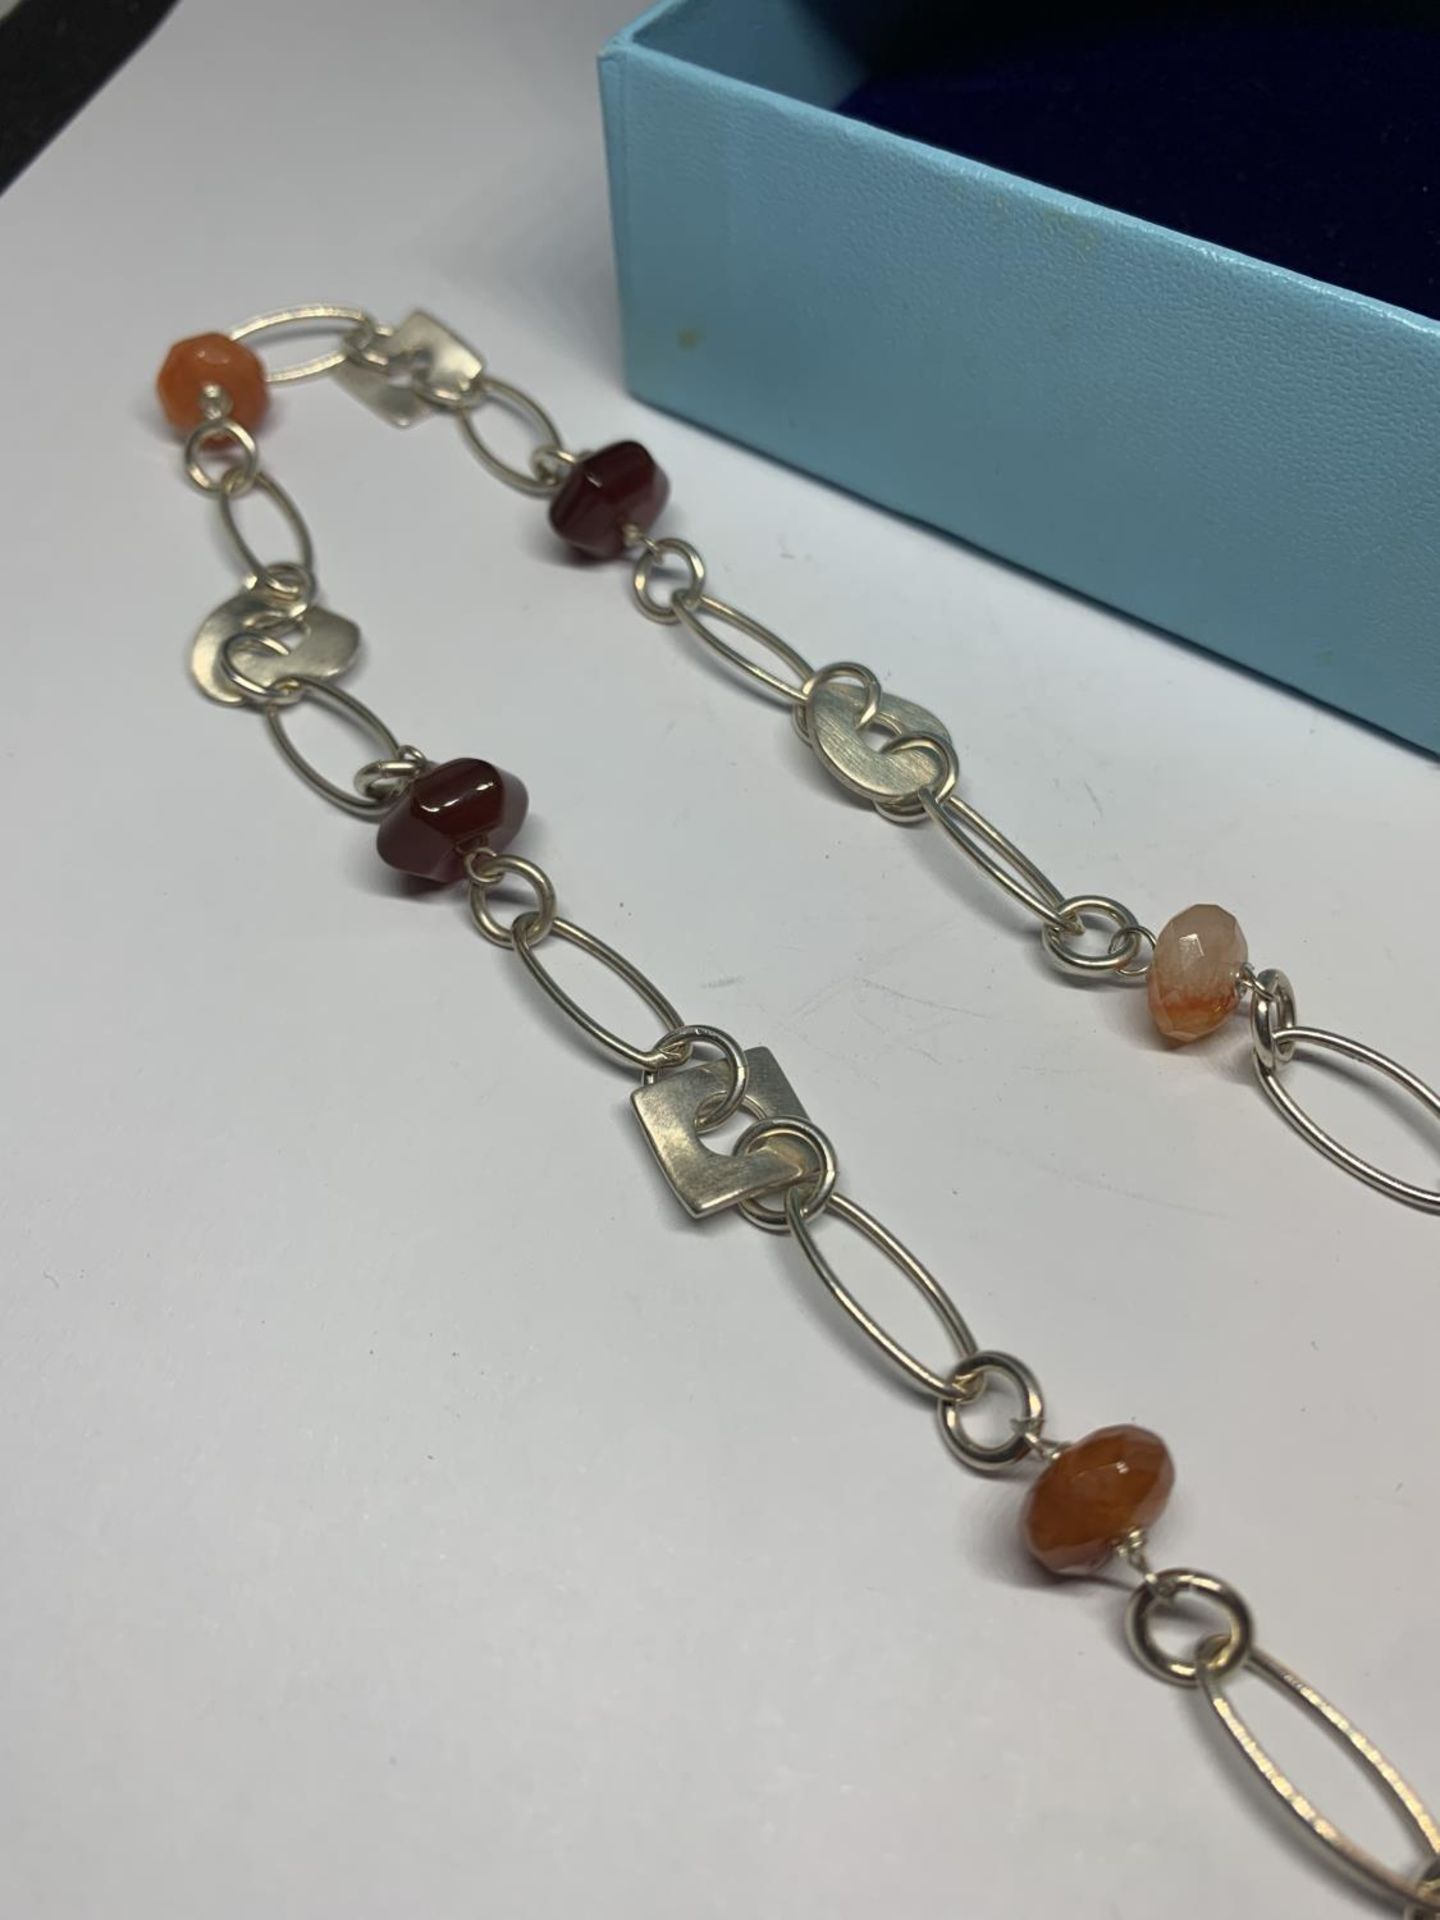 A SILVER AND AGATE NECKLACE IN A PRESENTATION BOX - Image 3 of 3